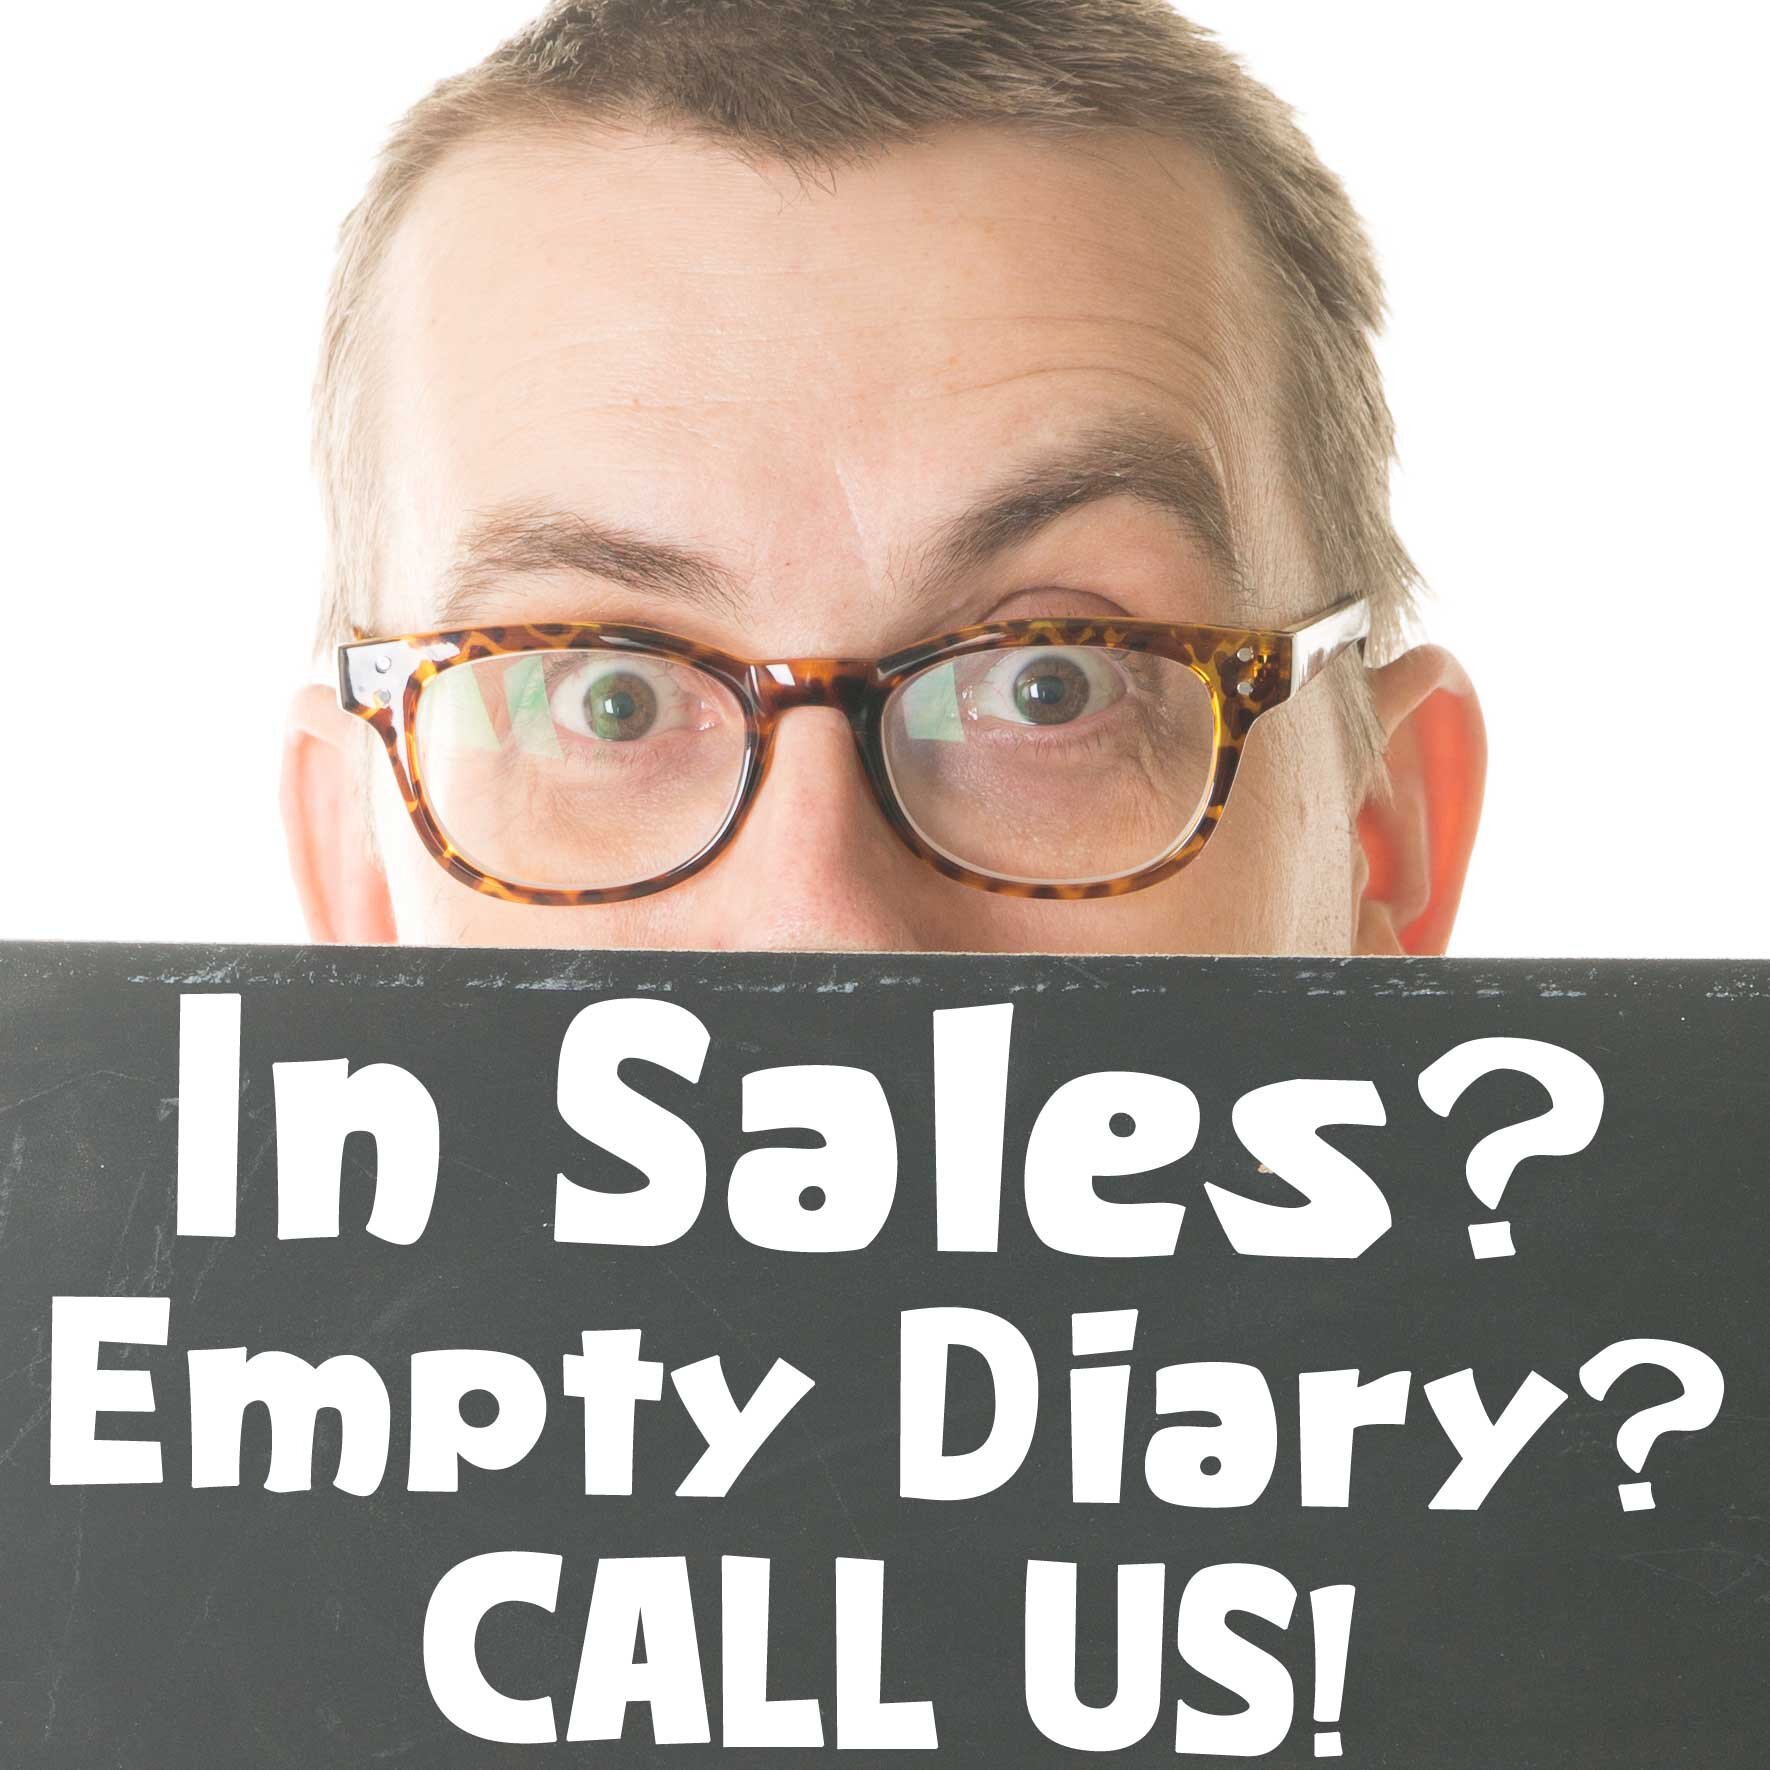 We book you qualified, quality sales appointments with senior decision makers. In sales? Empty diary? Call us 0208 088 1 808 or visit http://t.co/CjeUxvU41p